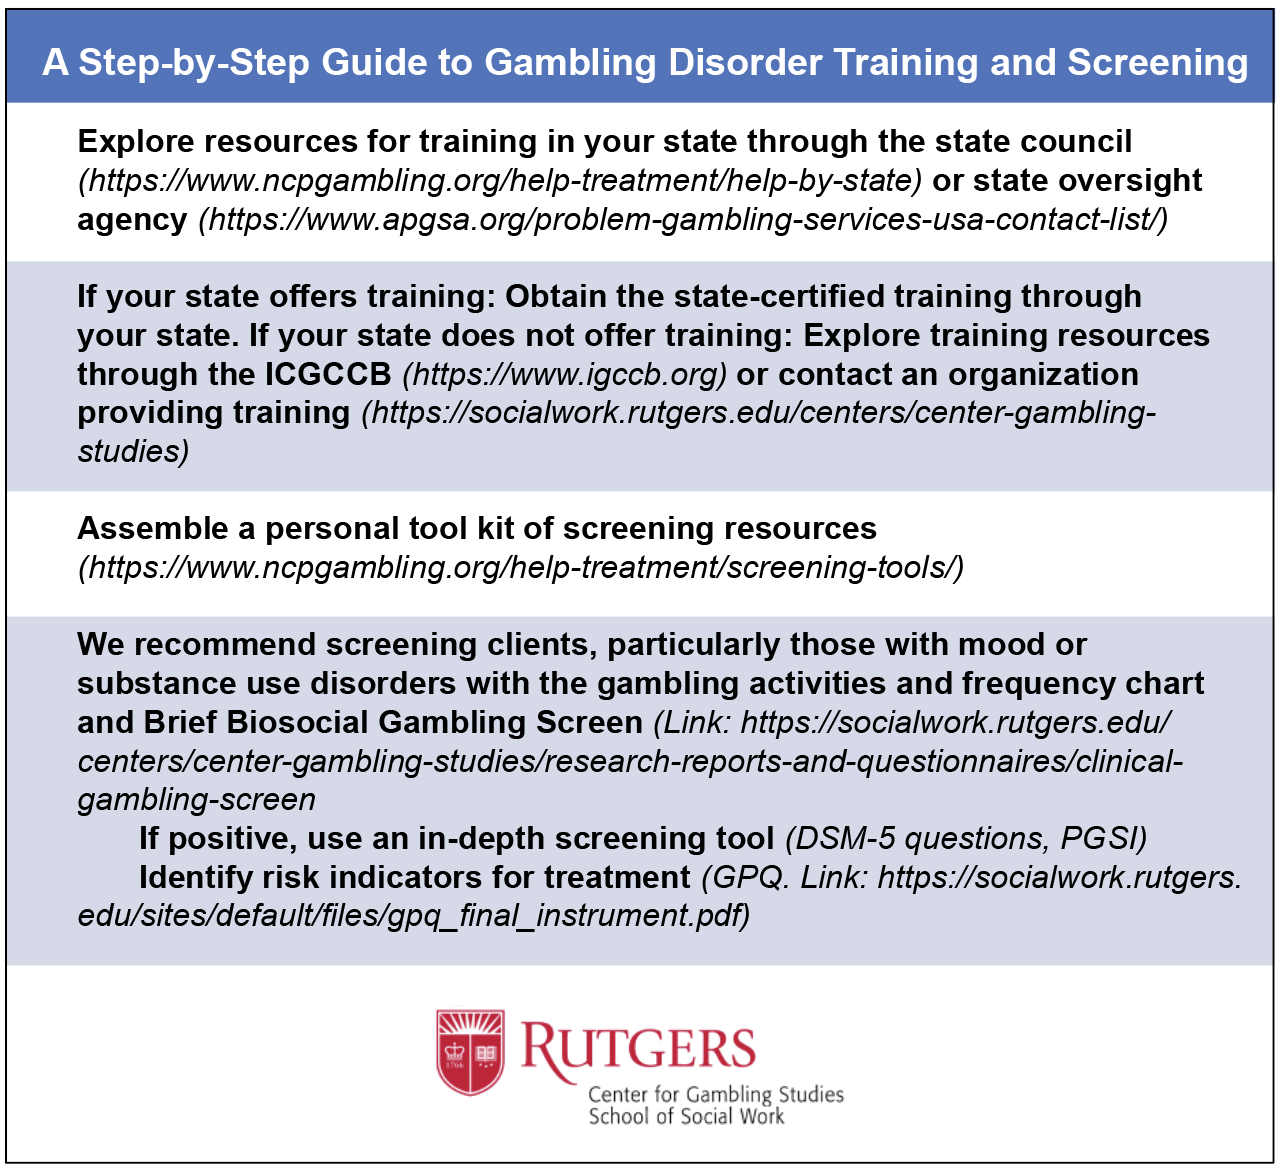 A step-by-step guide to gambling disorder training and screening